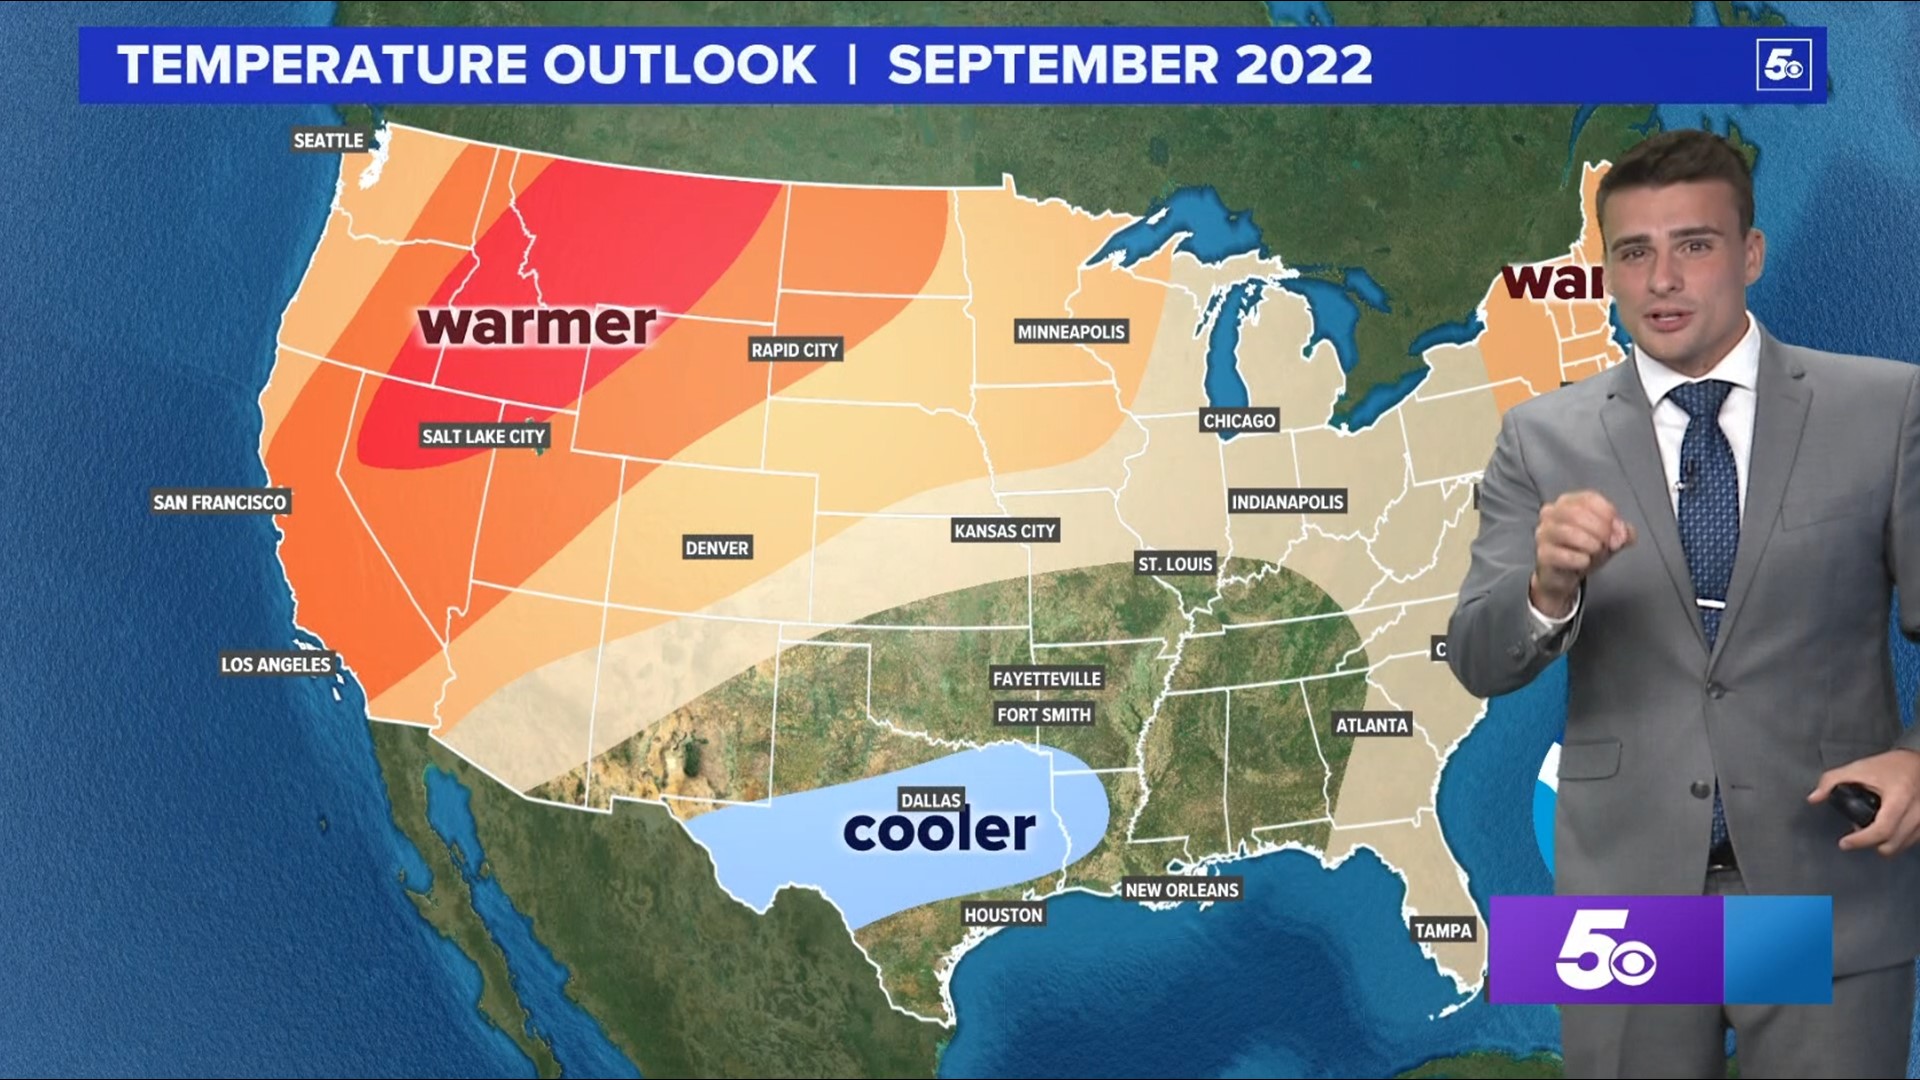 How will September 2022 turn out compared to what it is normally like? The 5NEWS Weather Team takes a look at the jet stream and tropical patterns.